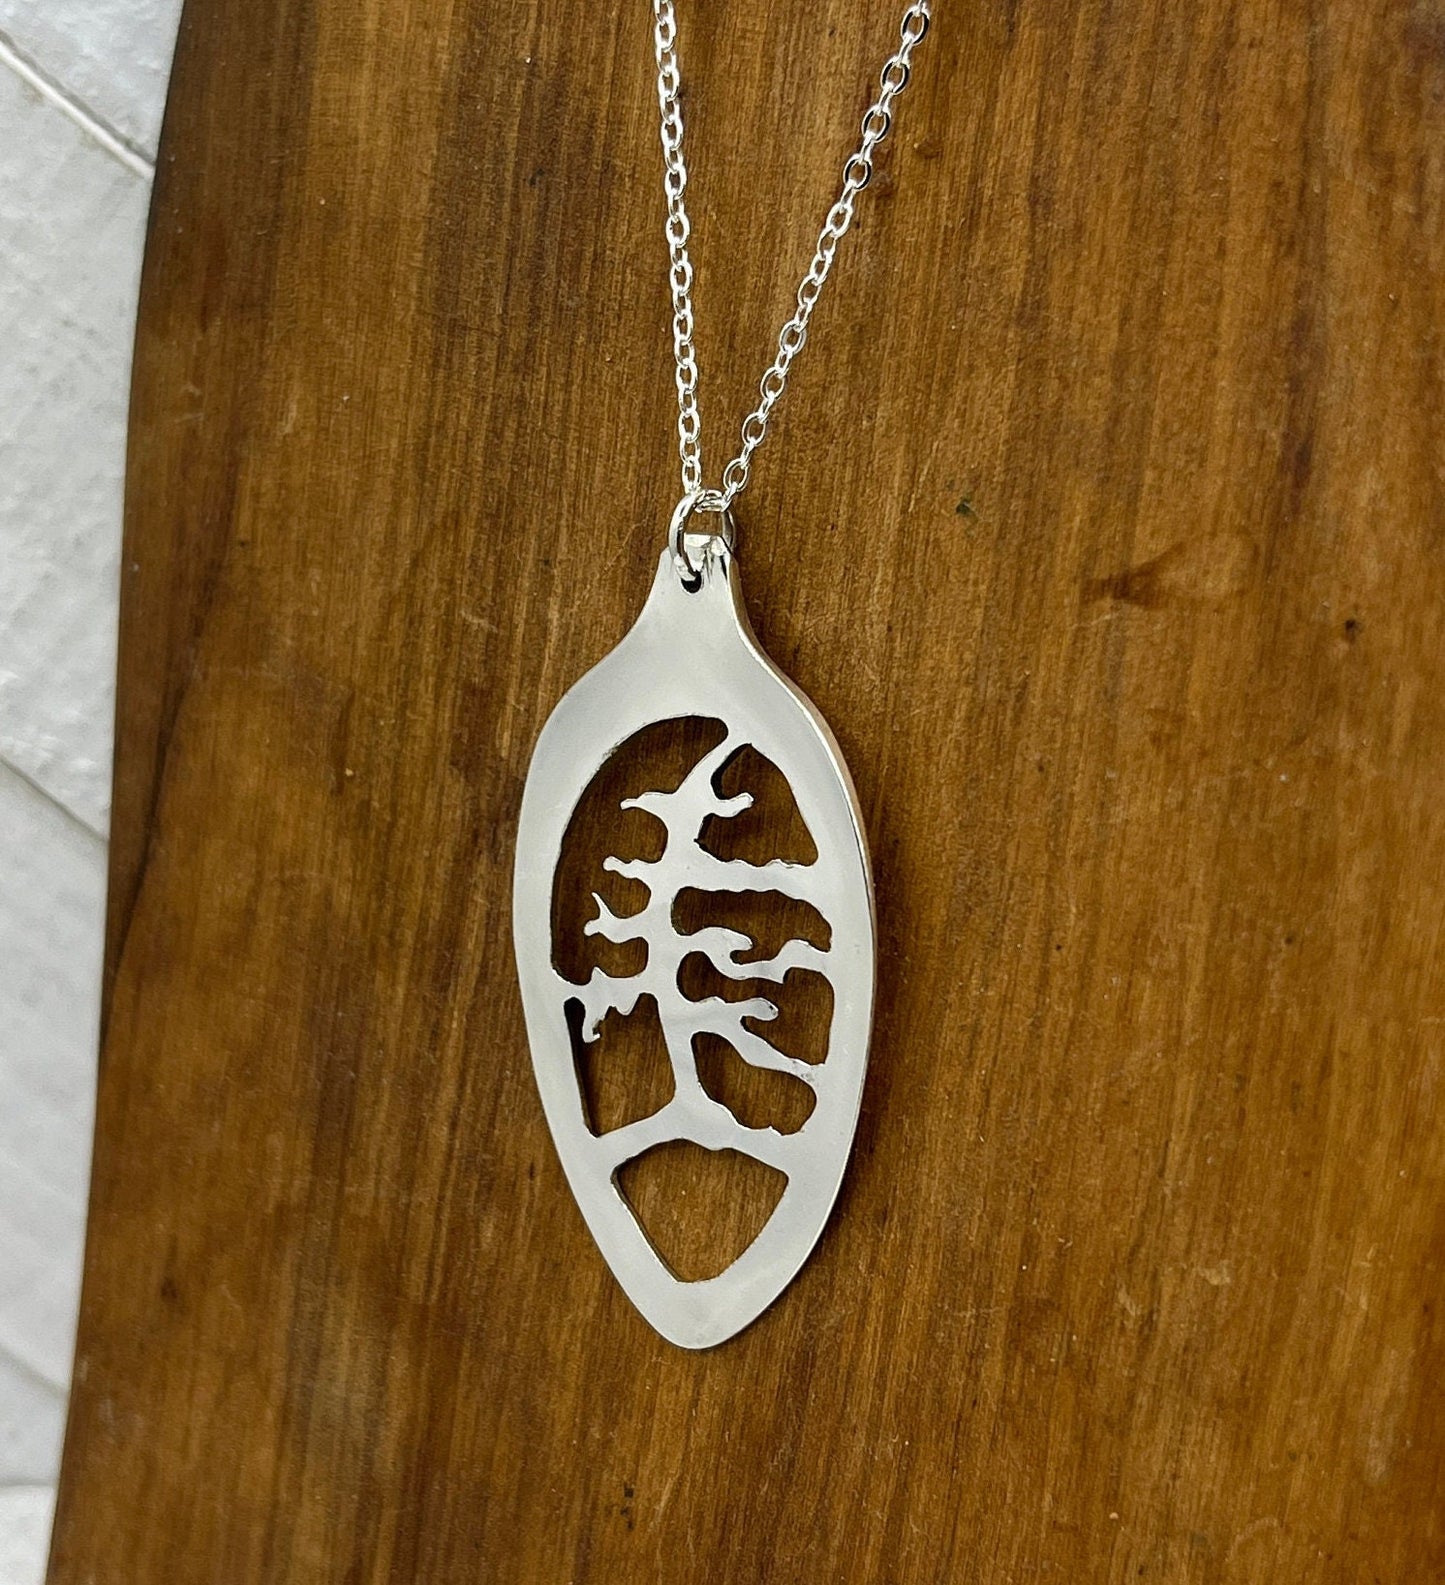 Tree Pendant Hand Drawn and Cut from Vintage?Antique spoon bowl, silver necklace pendant for her, Pine Tree Necklace, Eco Friendly Upcycled